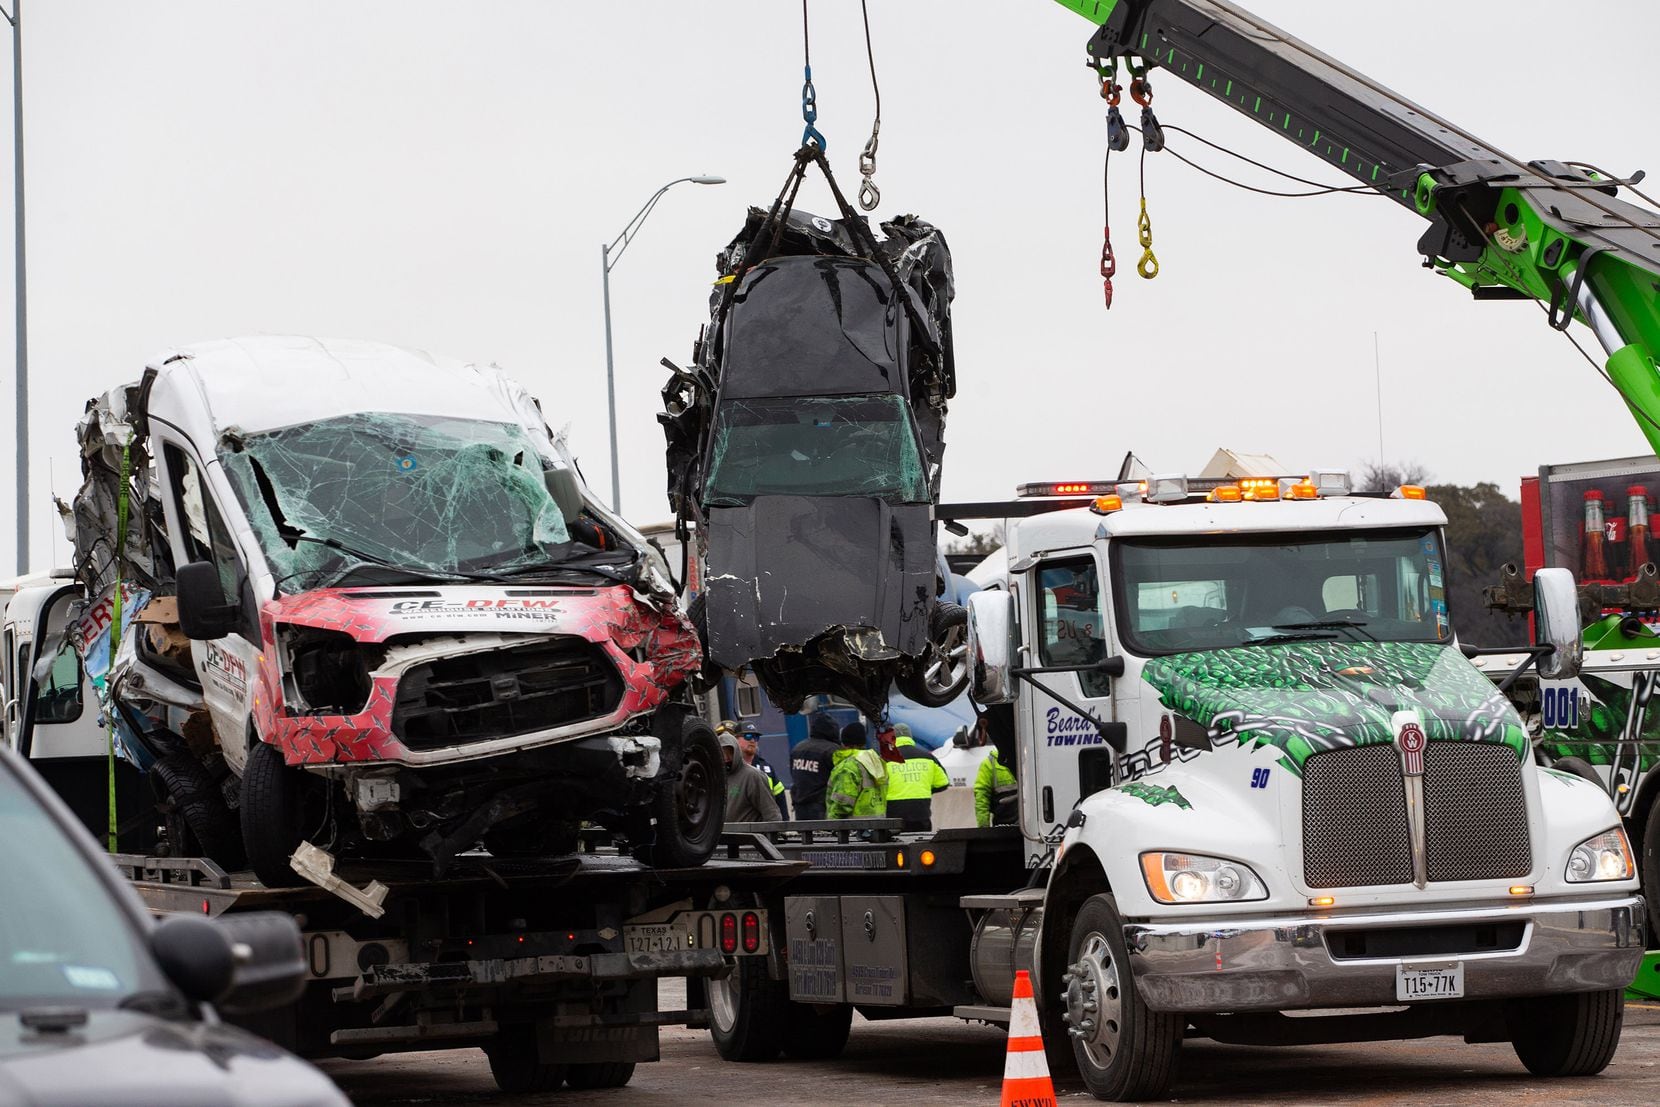 Crews work to clear the mass casualty pile-up on I-35W and Northside Drive in Fort Worth on Feb. 11.